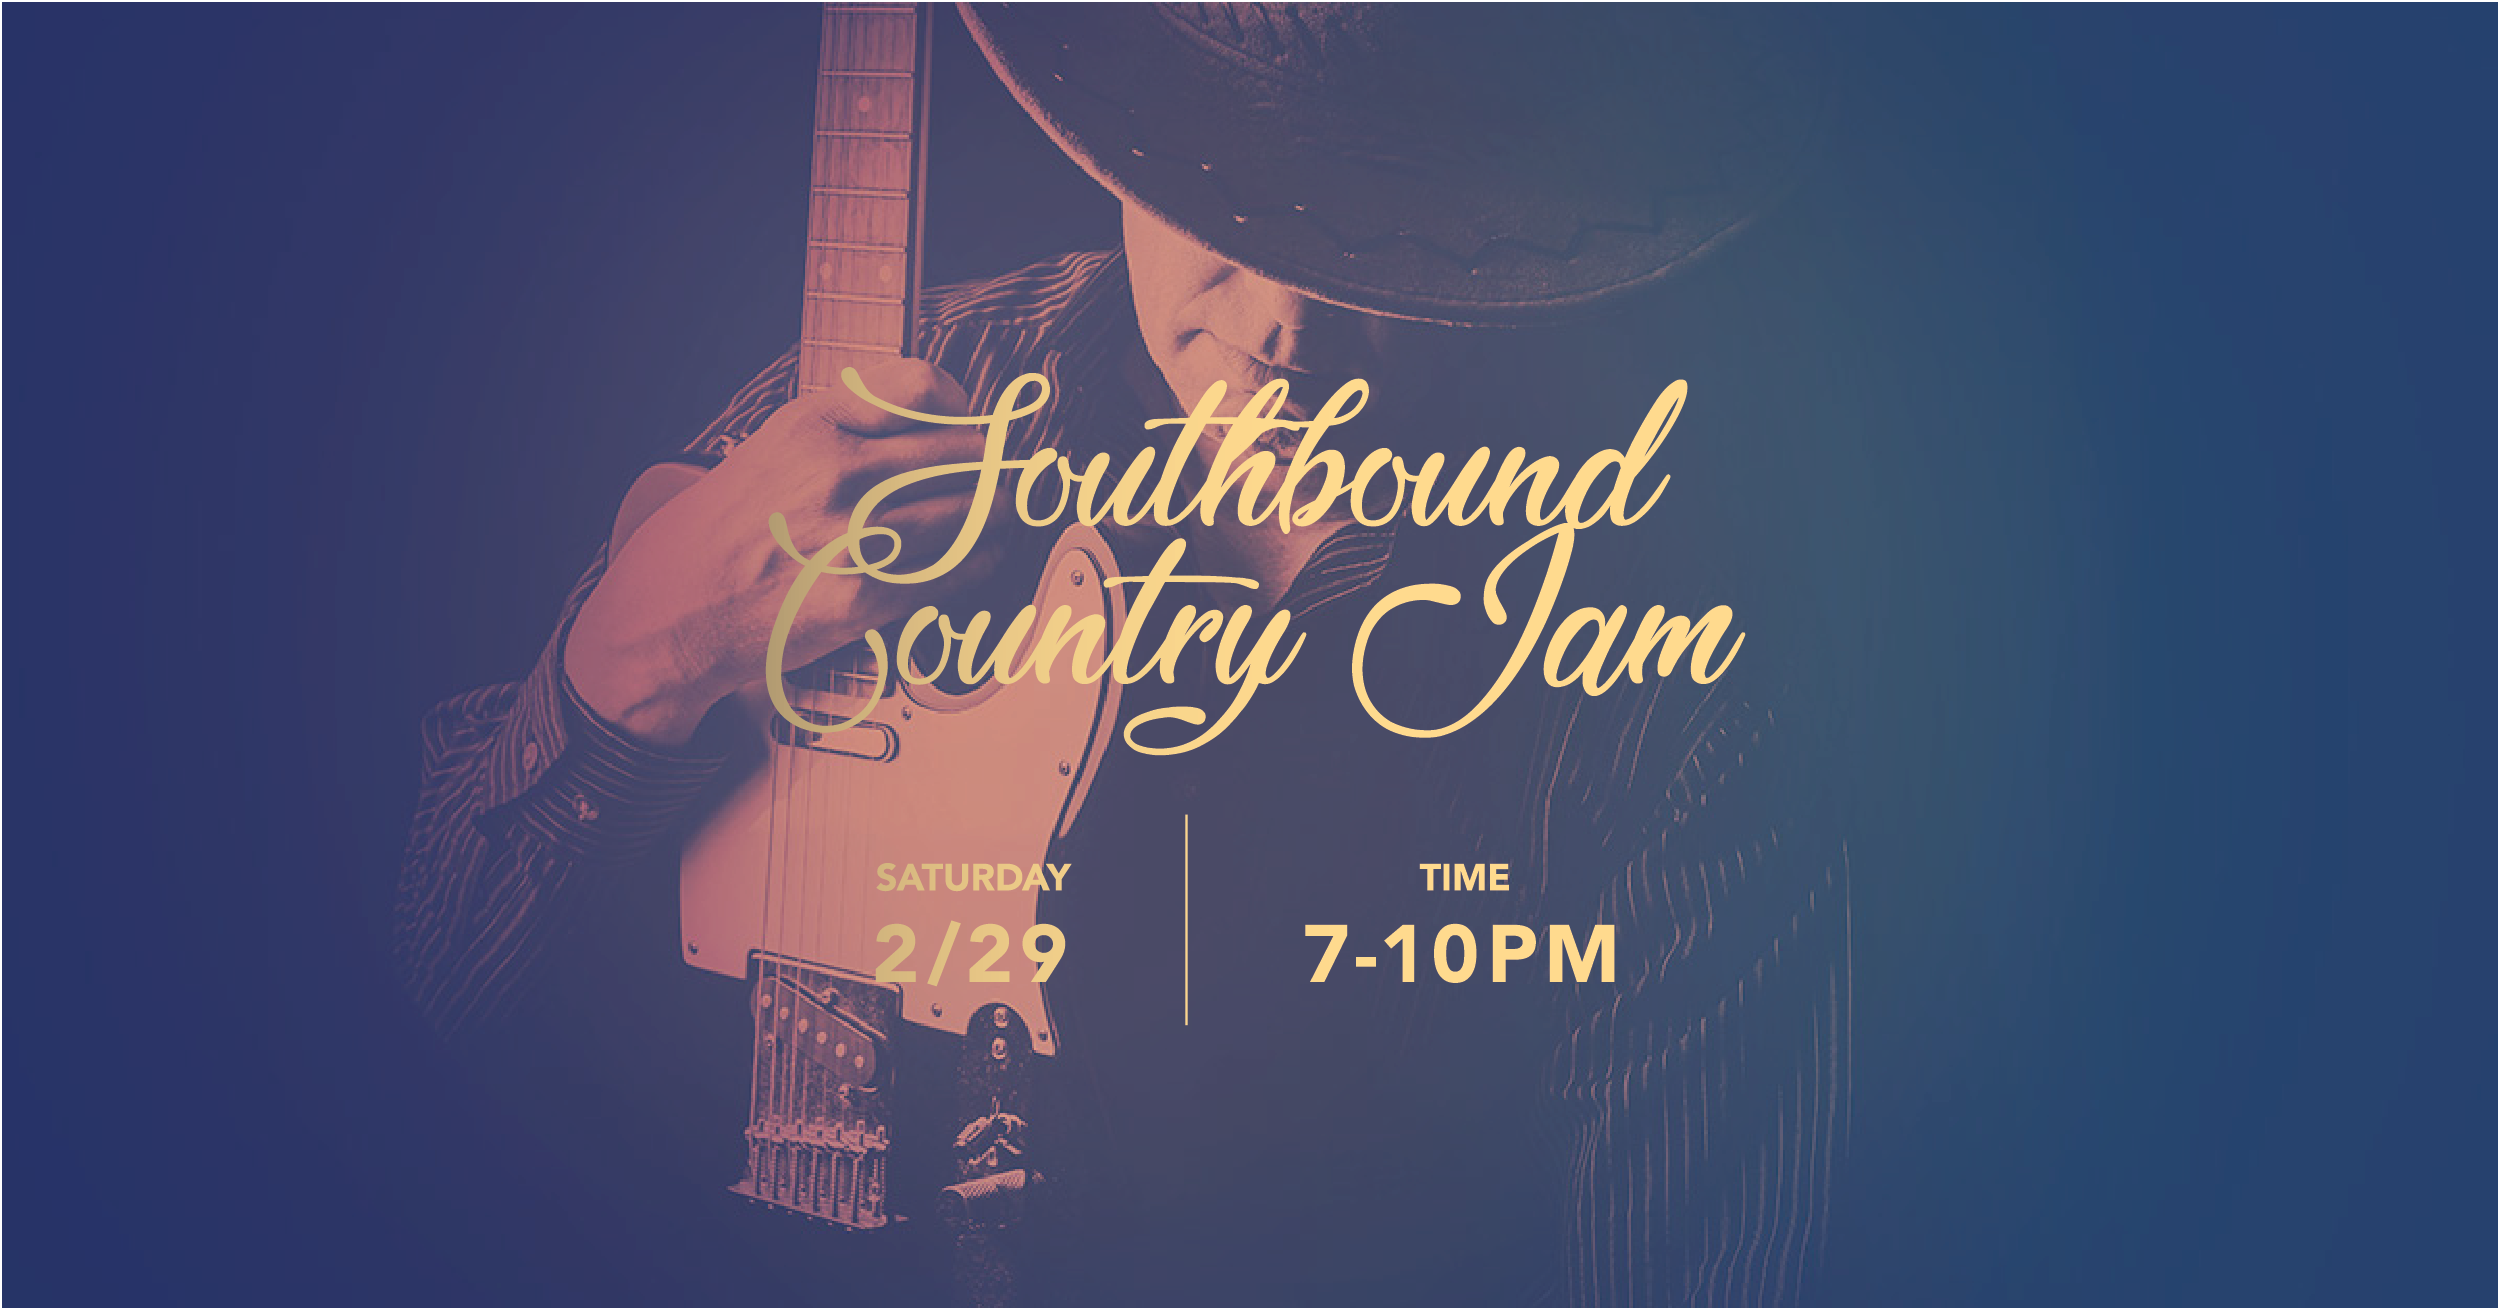 Southbound Country Jam 2/29 7pm-10pm